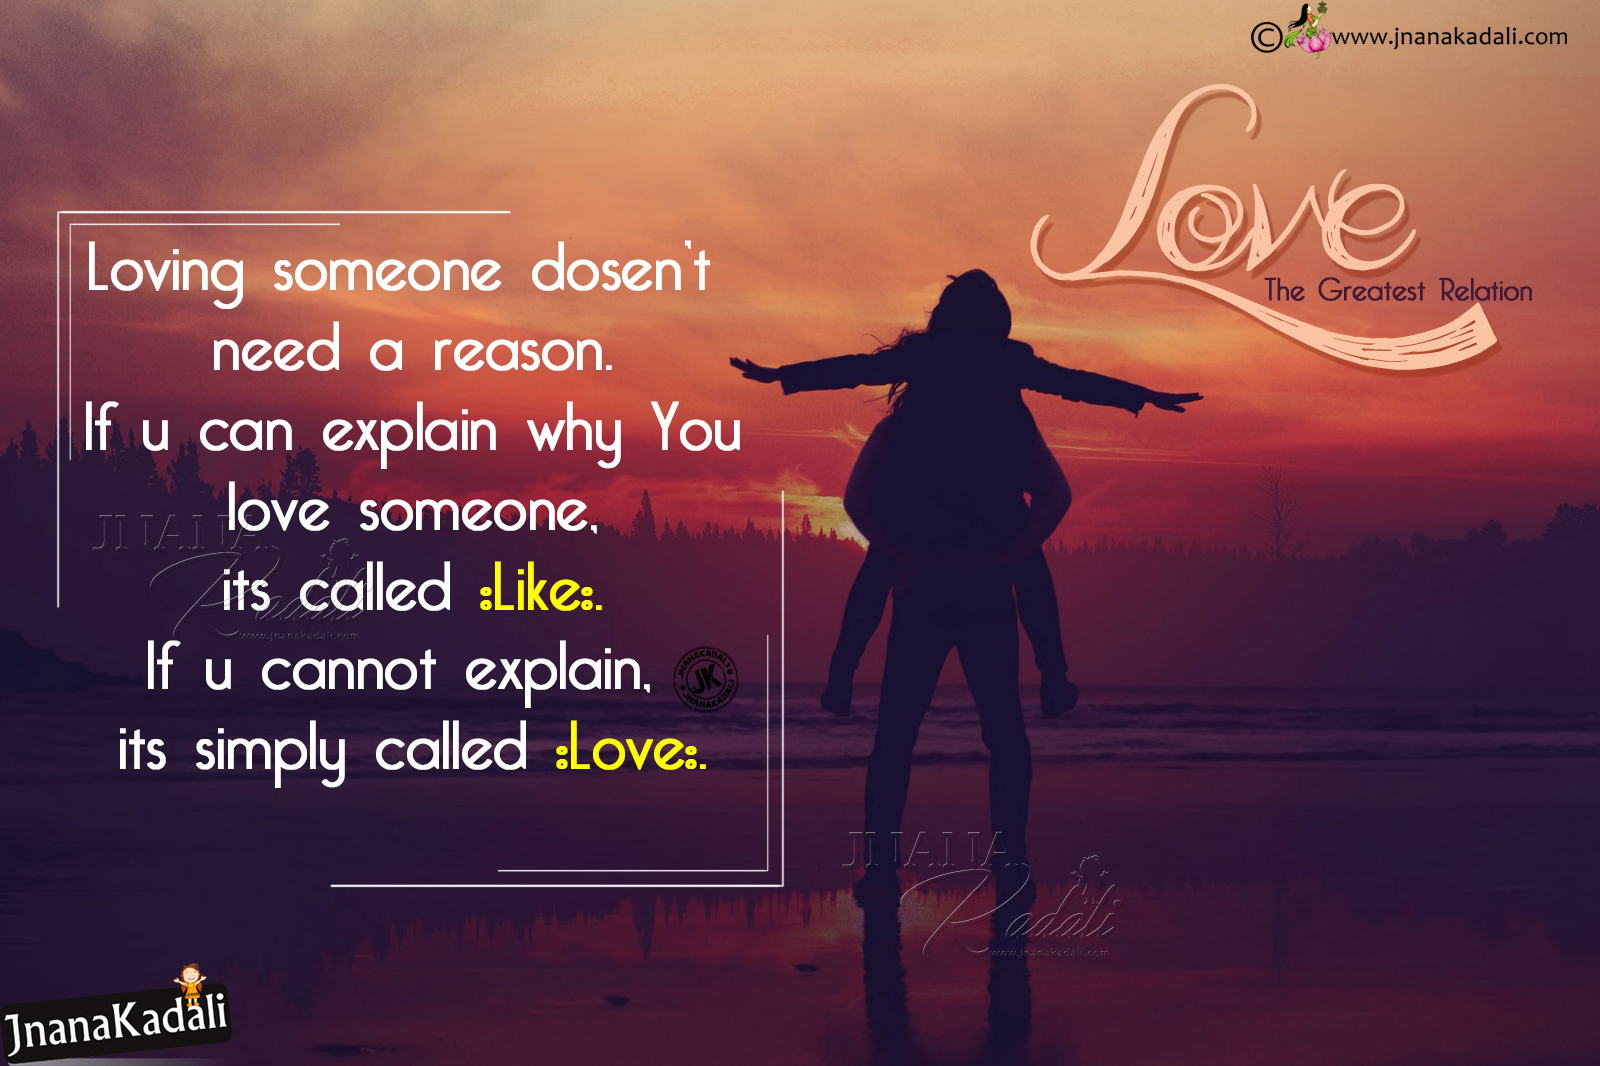 Heart Touching English Love messages-Love Couple hd wallpapers Free download  | JNANA  |Telugu Quotes|English quotes|Hindi quotes|Tamil  quotes|Dharmasandehalu|